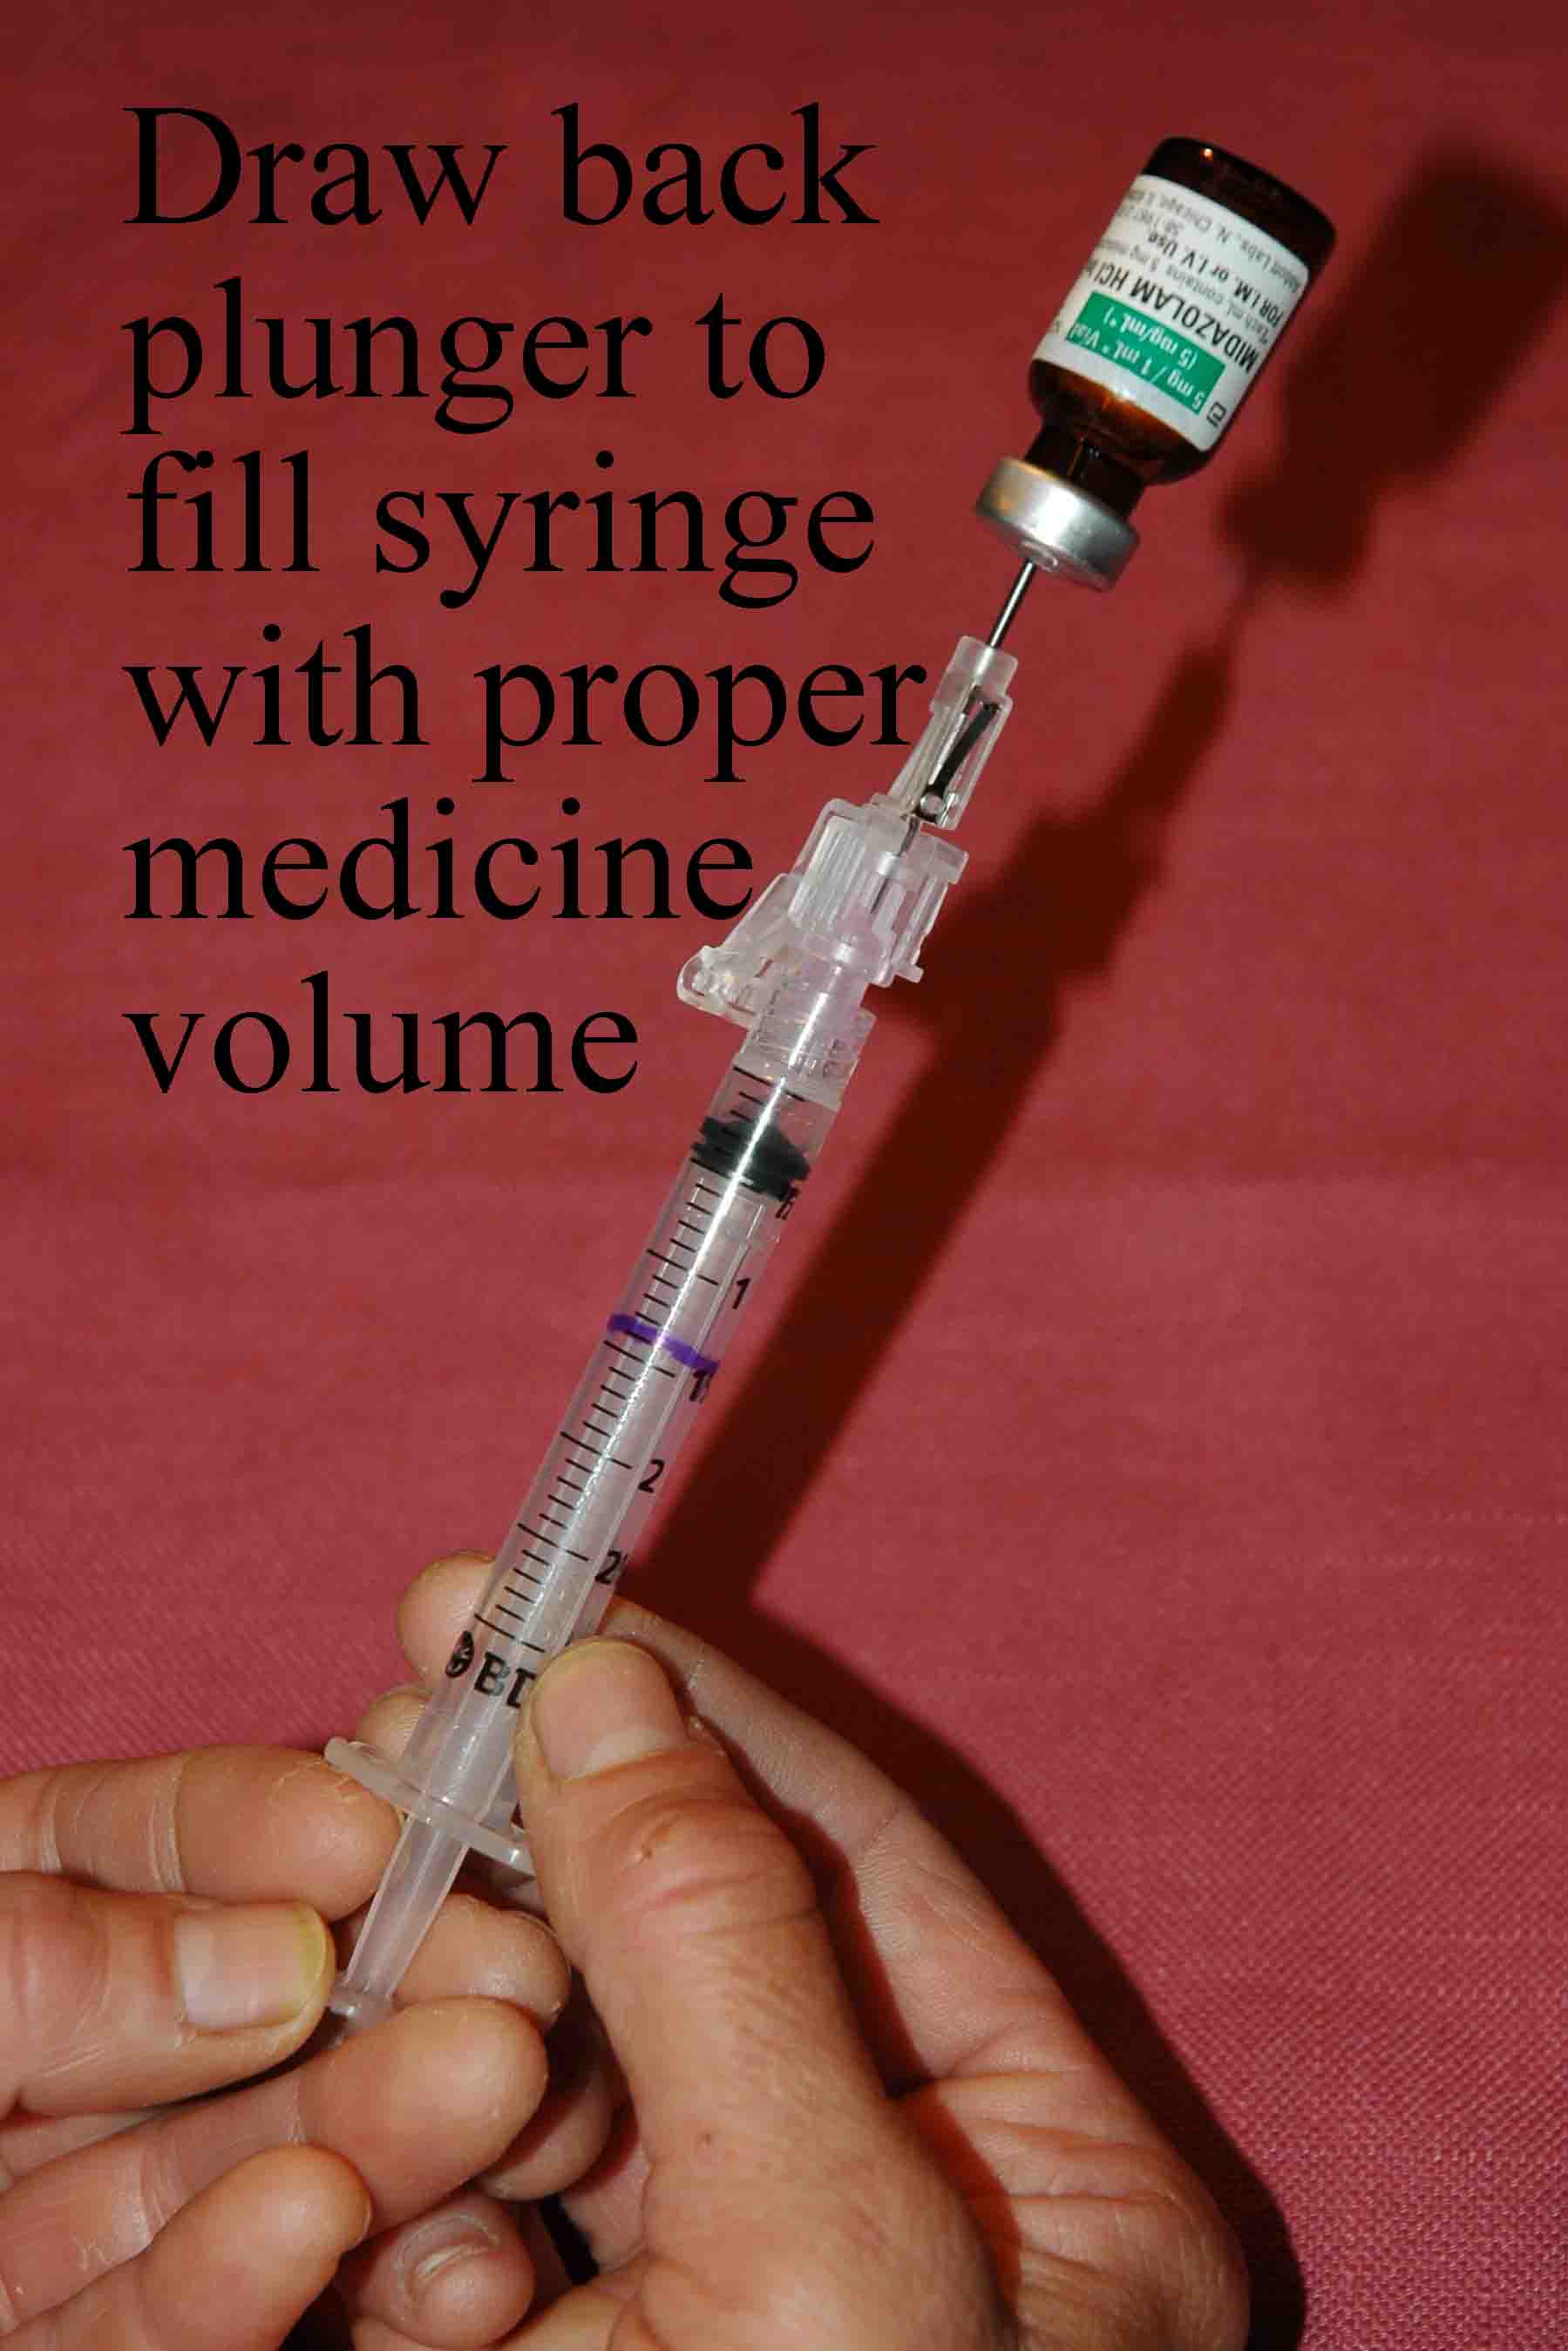 Aspirate correect volume of drug out of the vial into the syringe